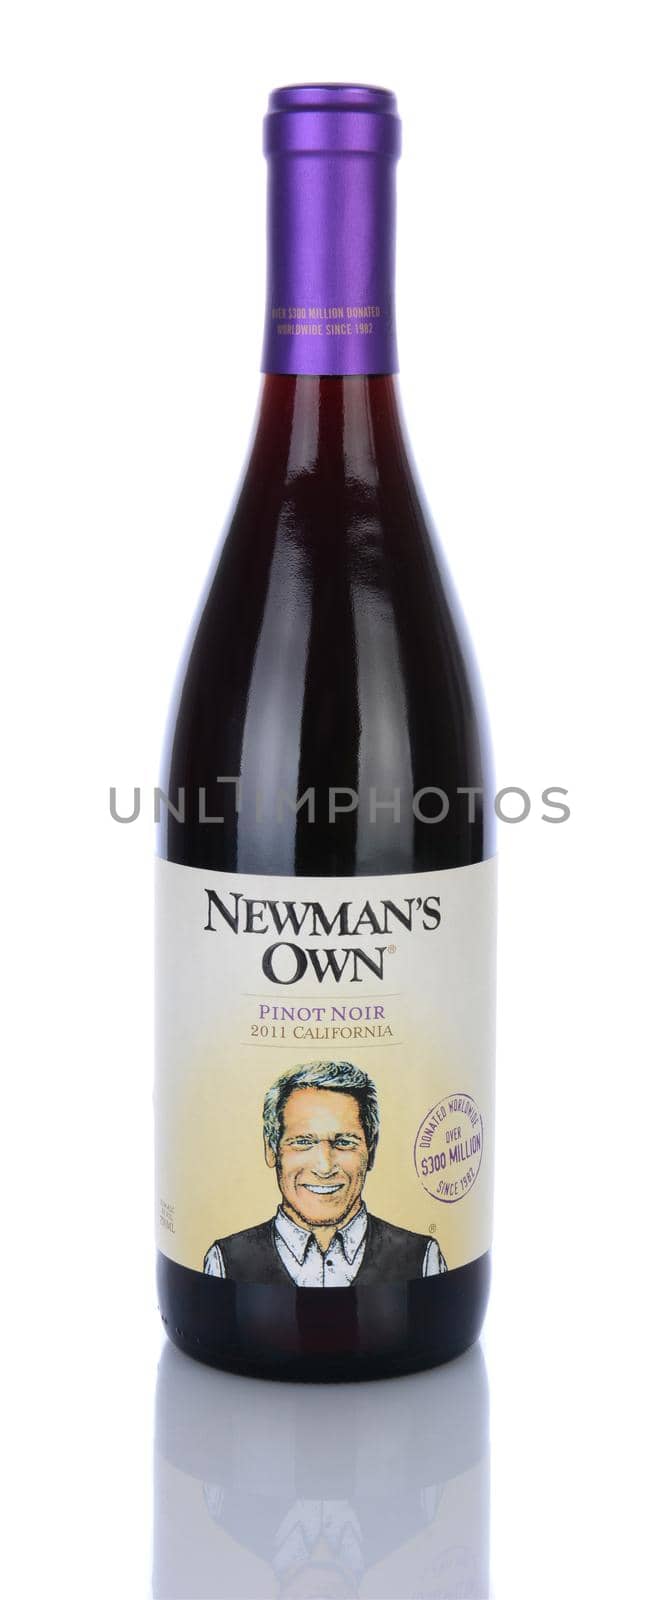 IRVINE, CA - January 29, 2014: A 750ml bottle of Newmans Own Pinot Noir California wine. The company gives 100% of the after-tax profits from the sale of its products to Newman's Own Foundation.